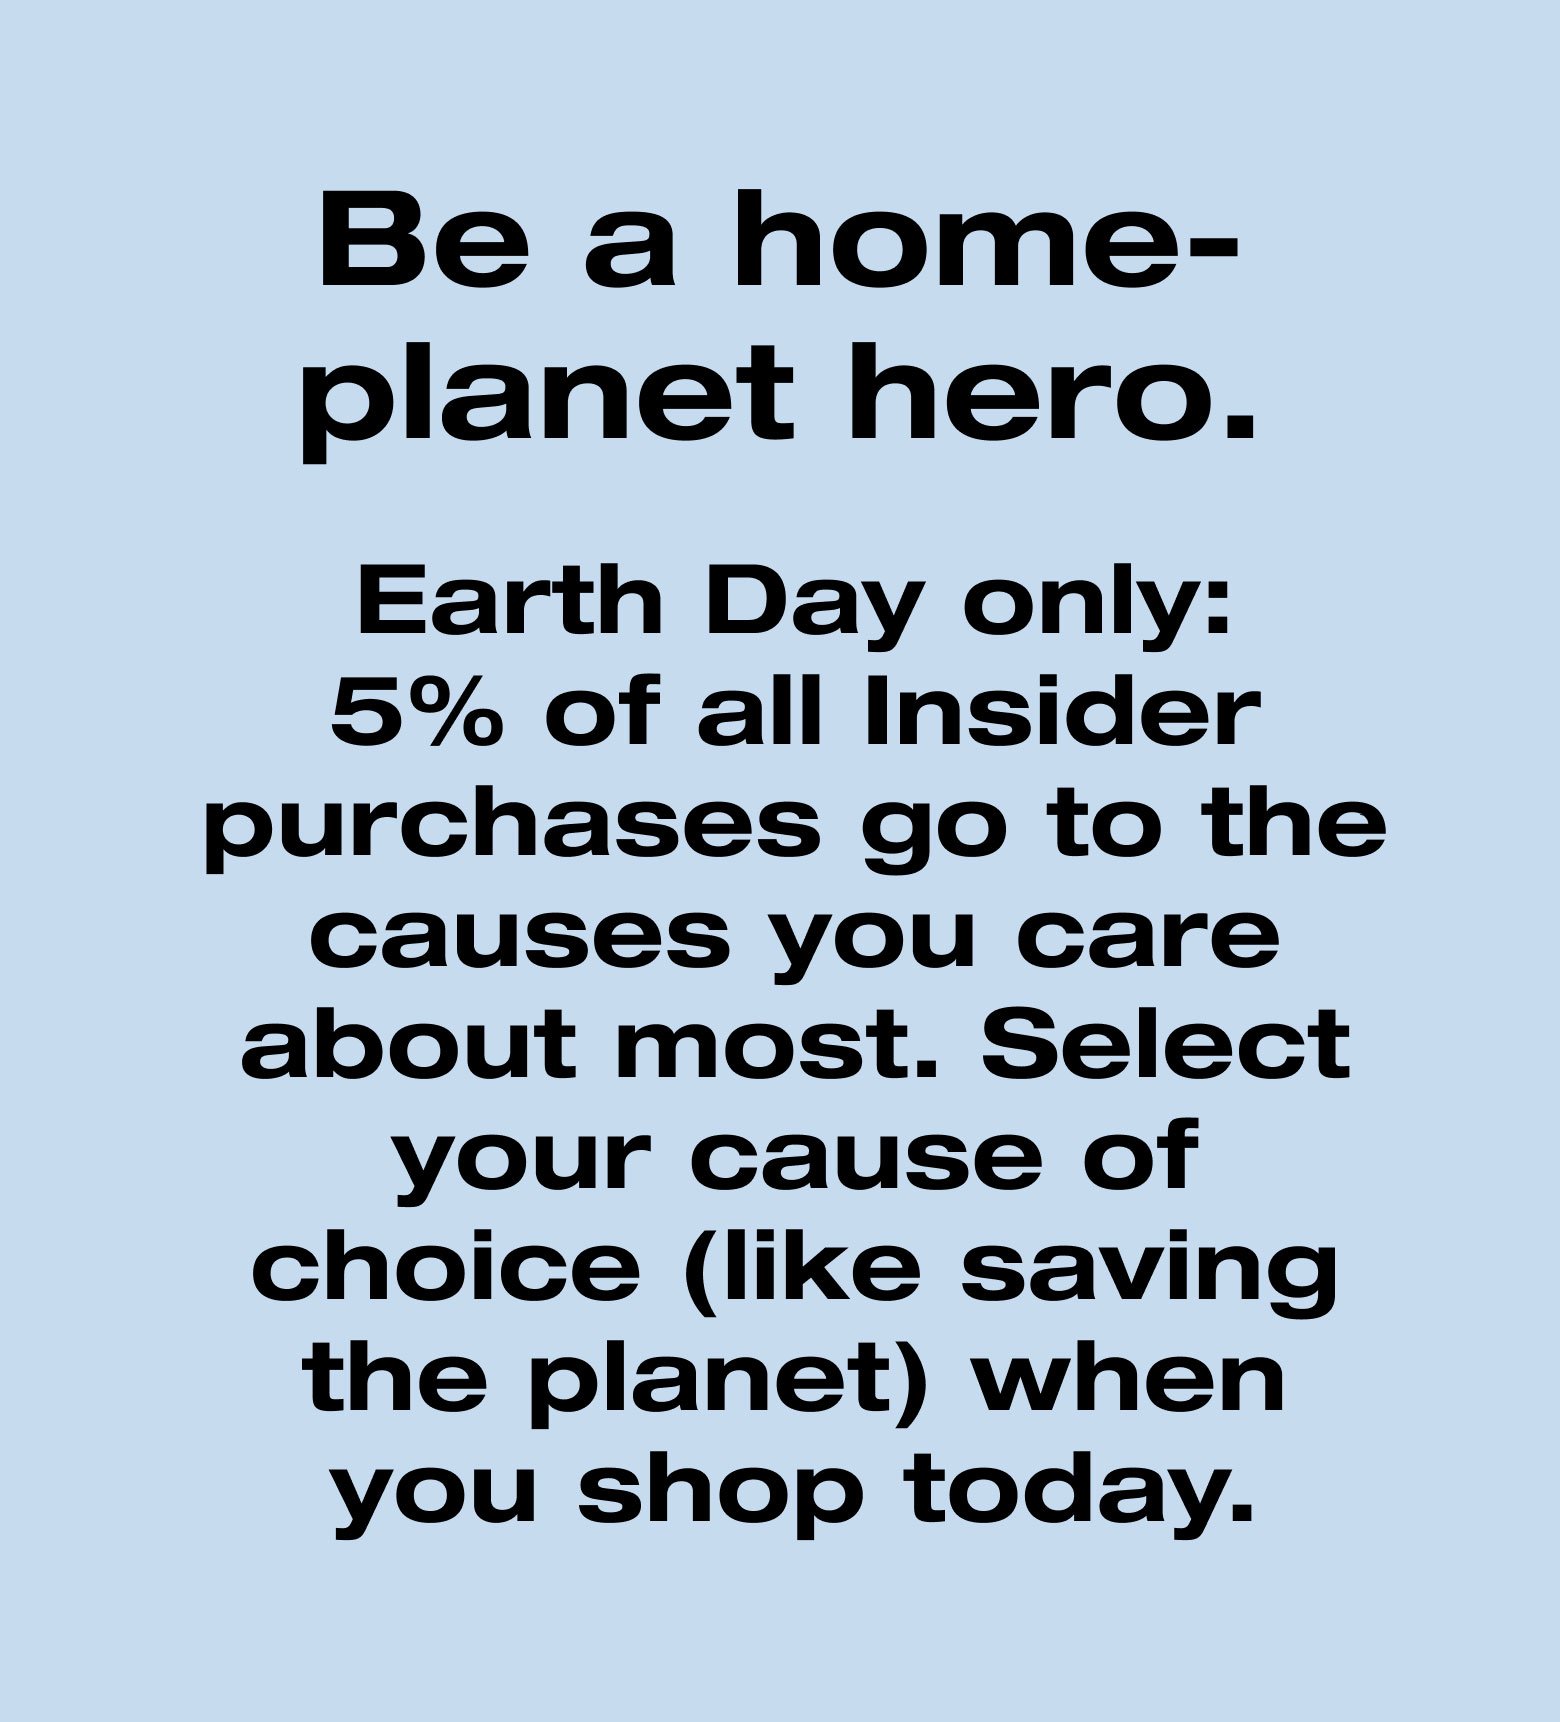 Be a home-planet hero. Earth Day only: 5% of all Insider purchases go to the causes you care about most. Select your cause of choice (like saving the planet) when you shop today.